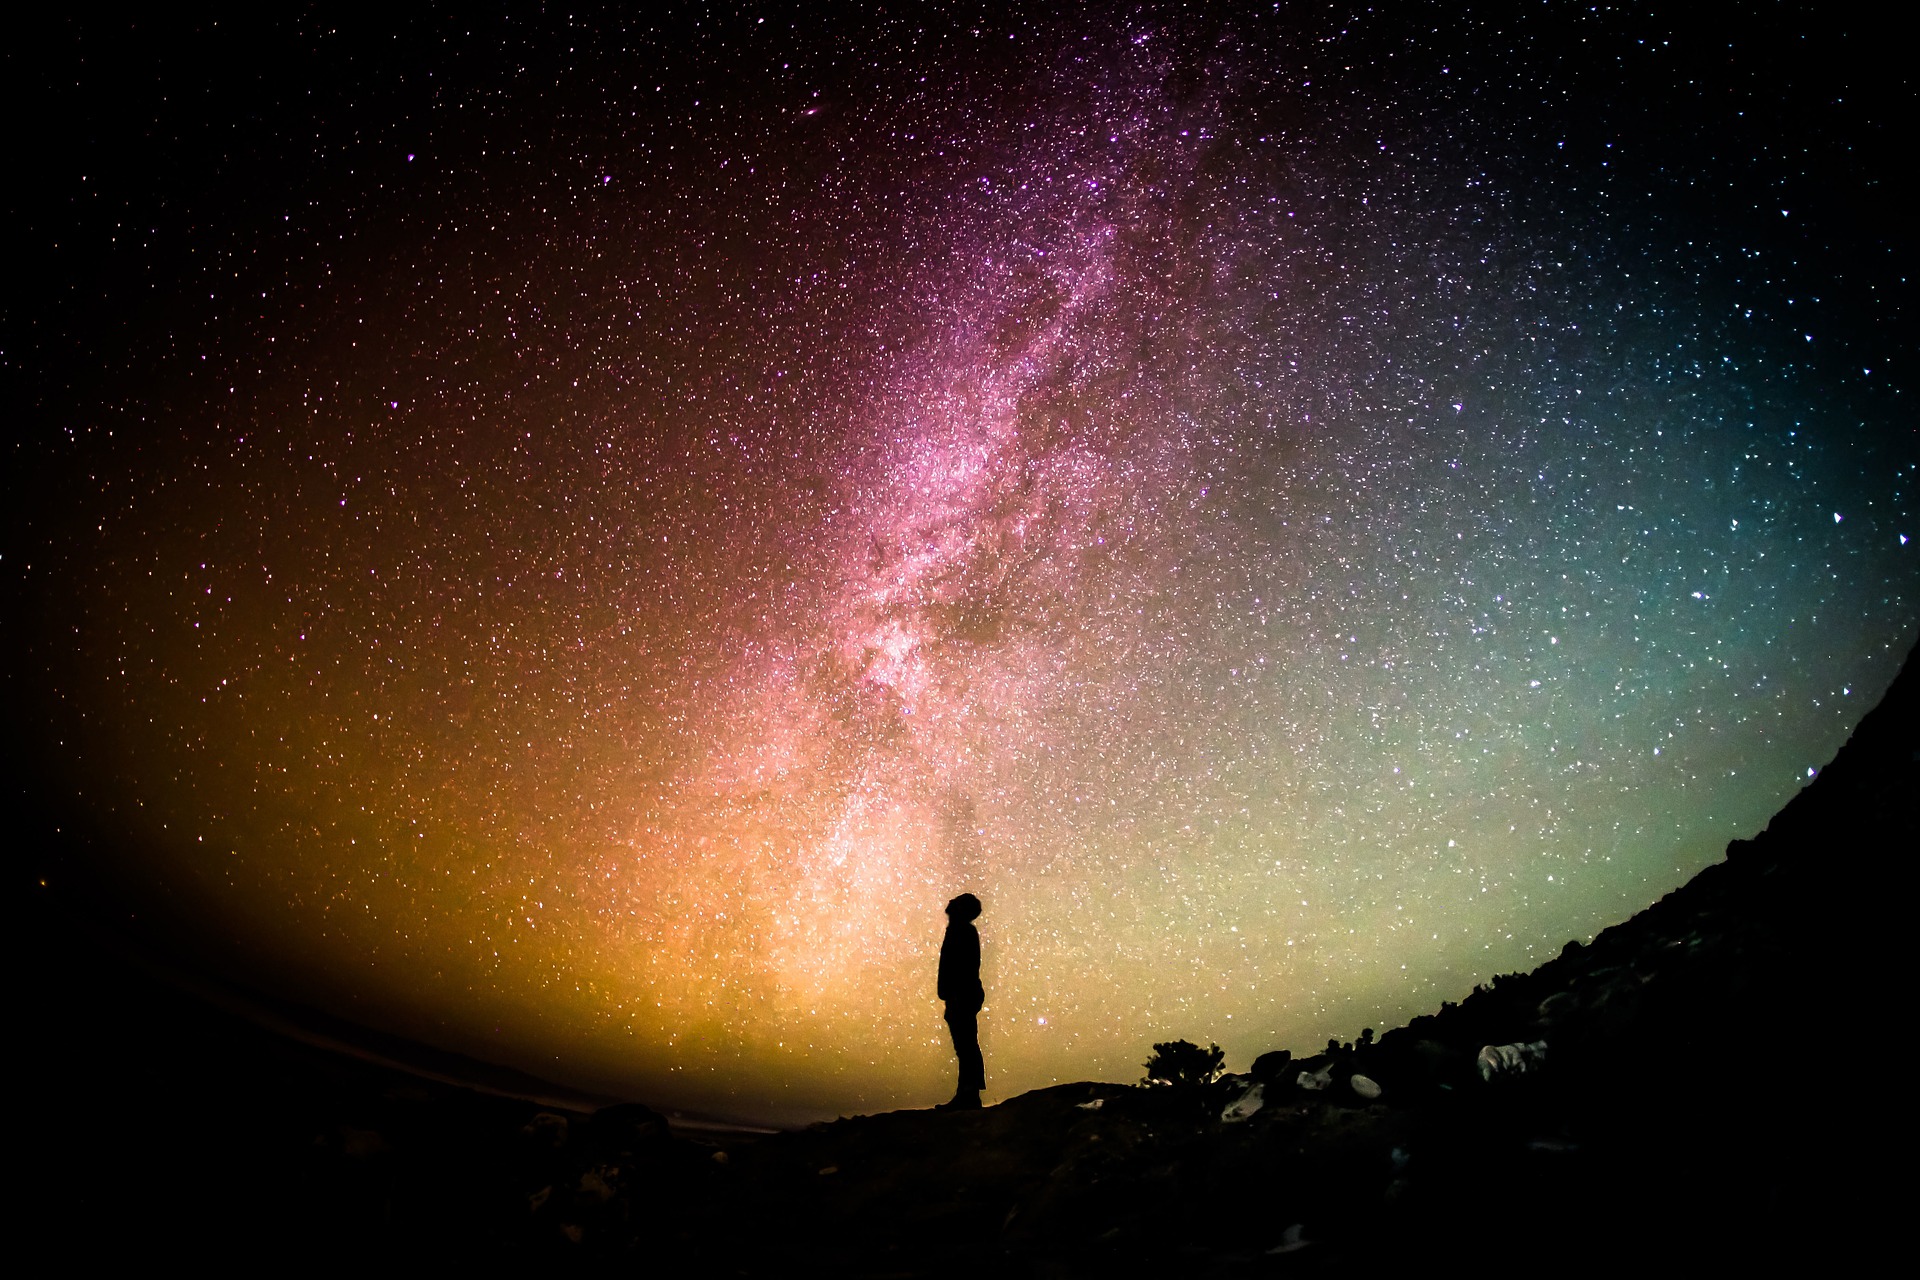 A person looks at a colorful night sky.